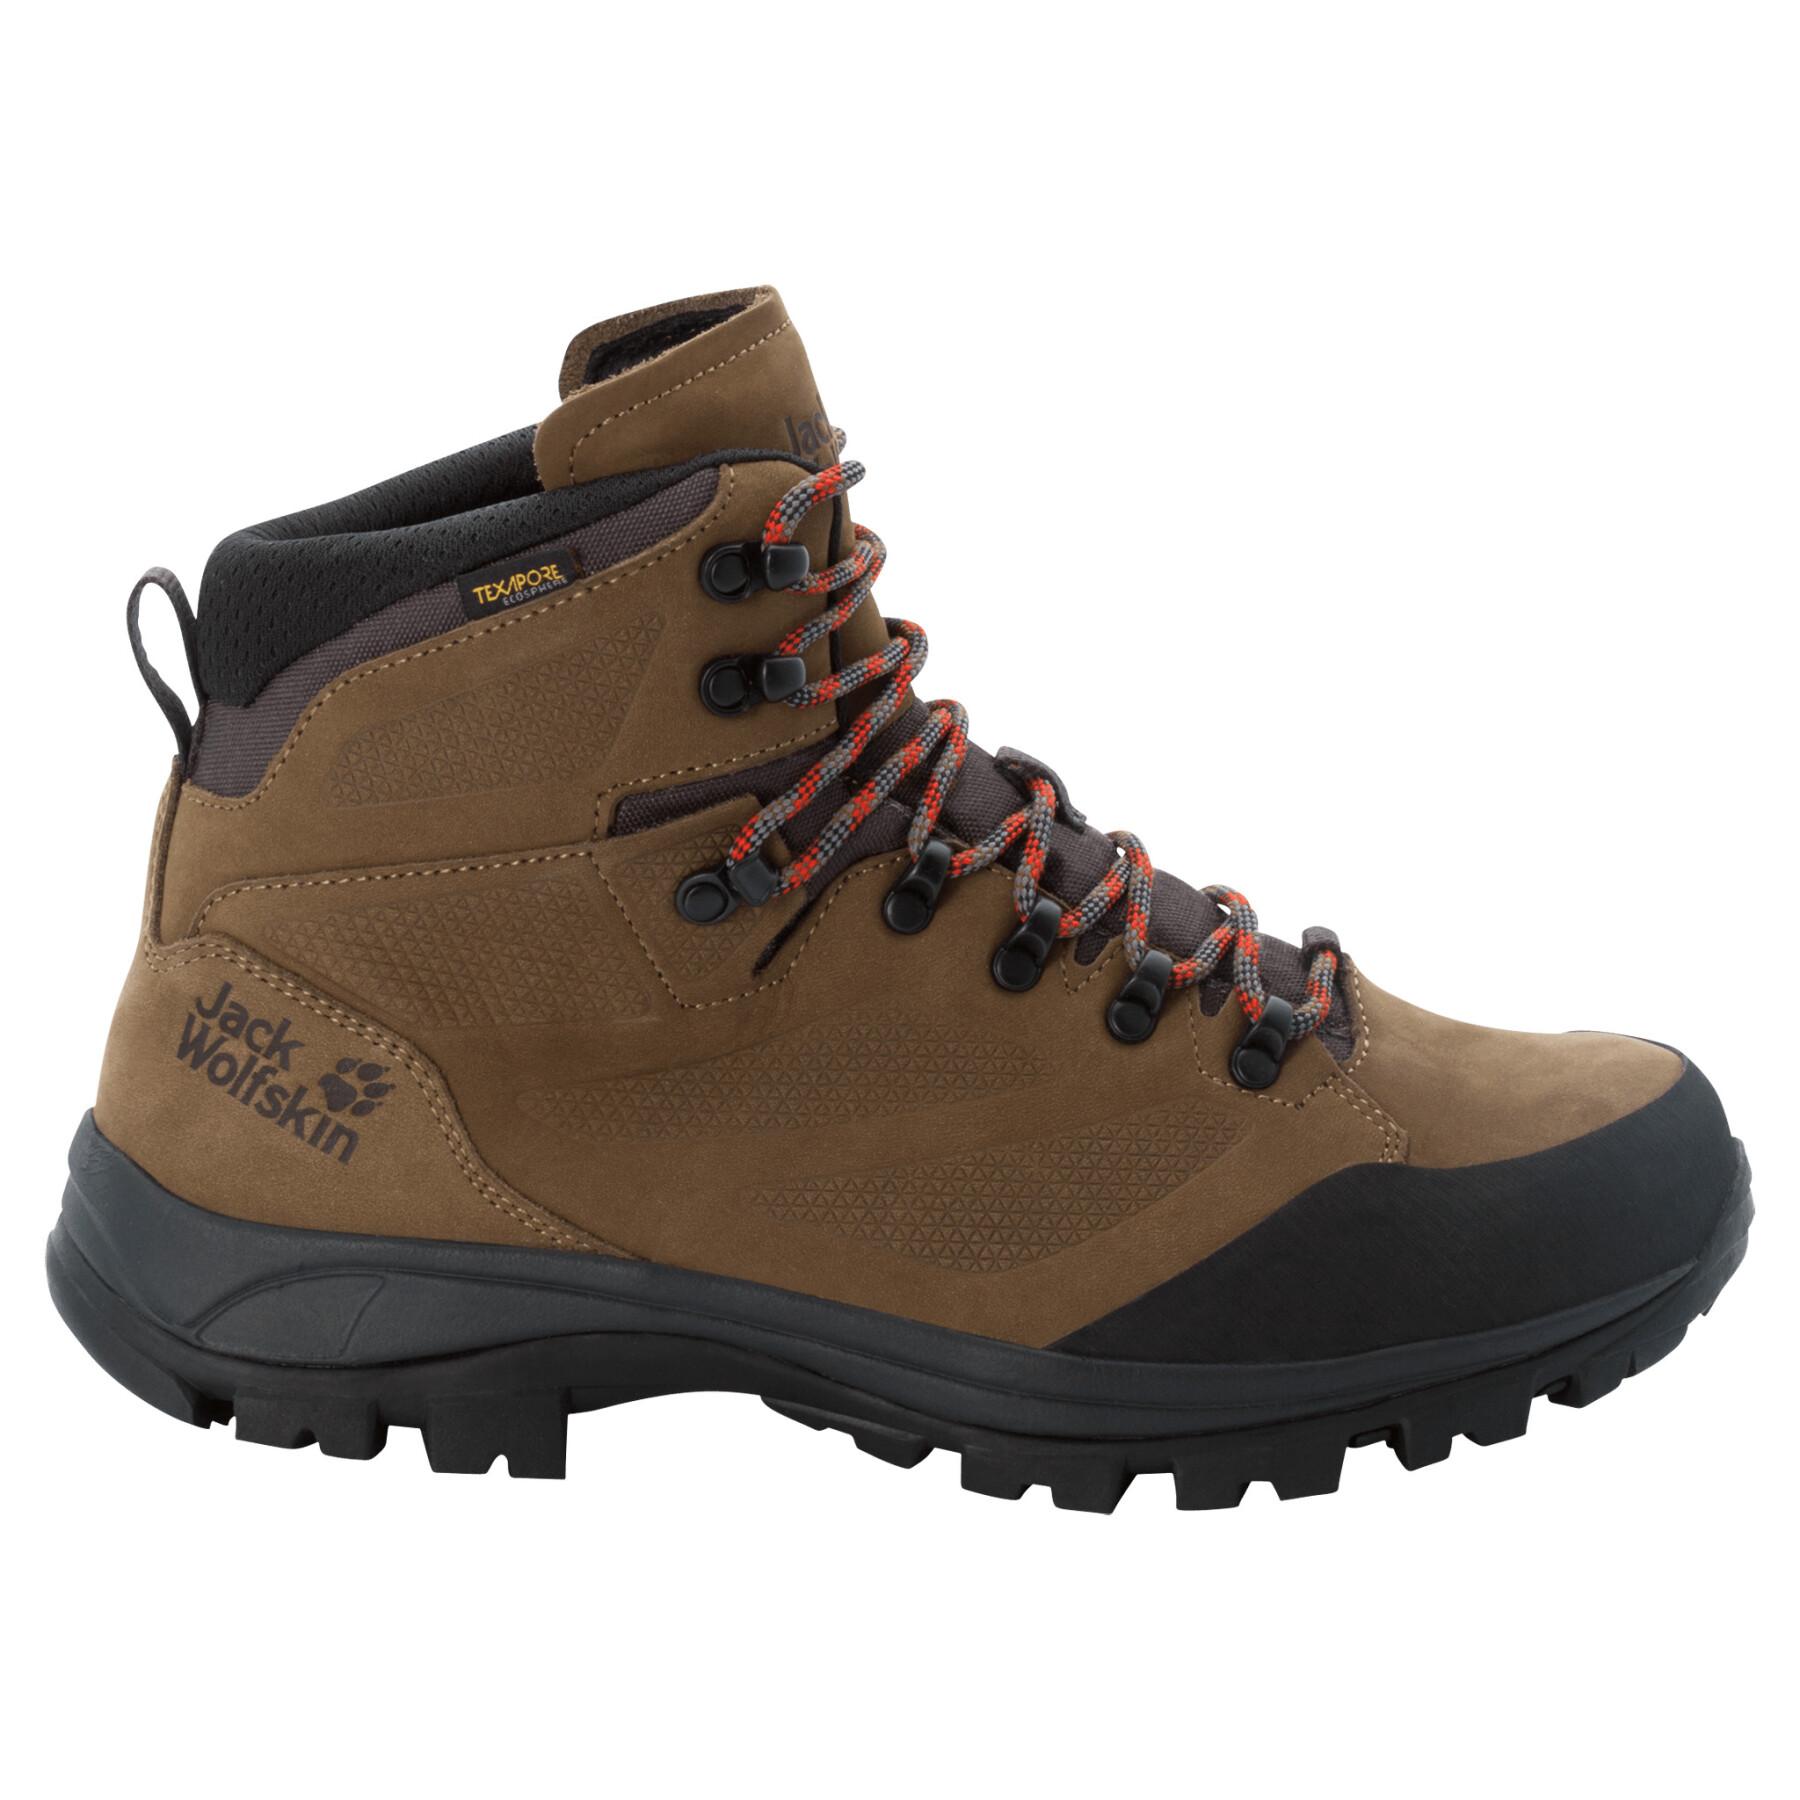 Hiking shoes Jack Wolfskin Rebellion Texapore Mid GT